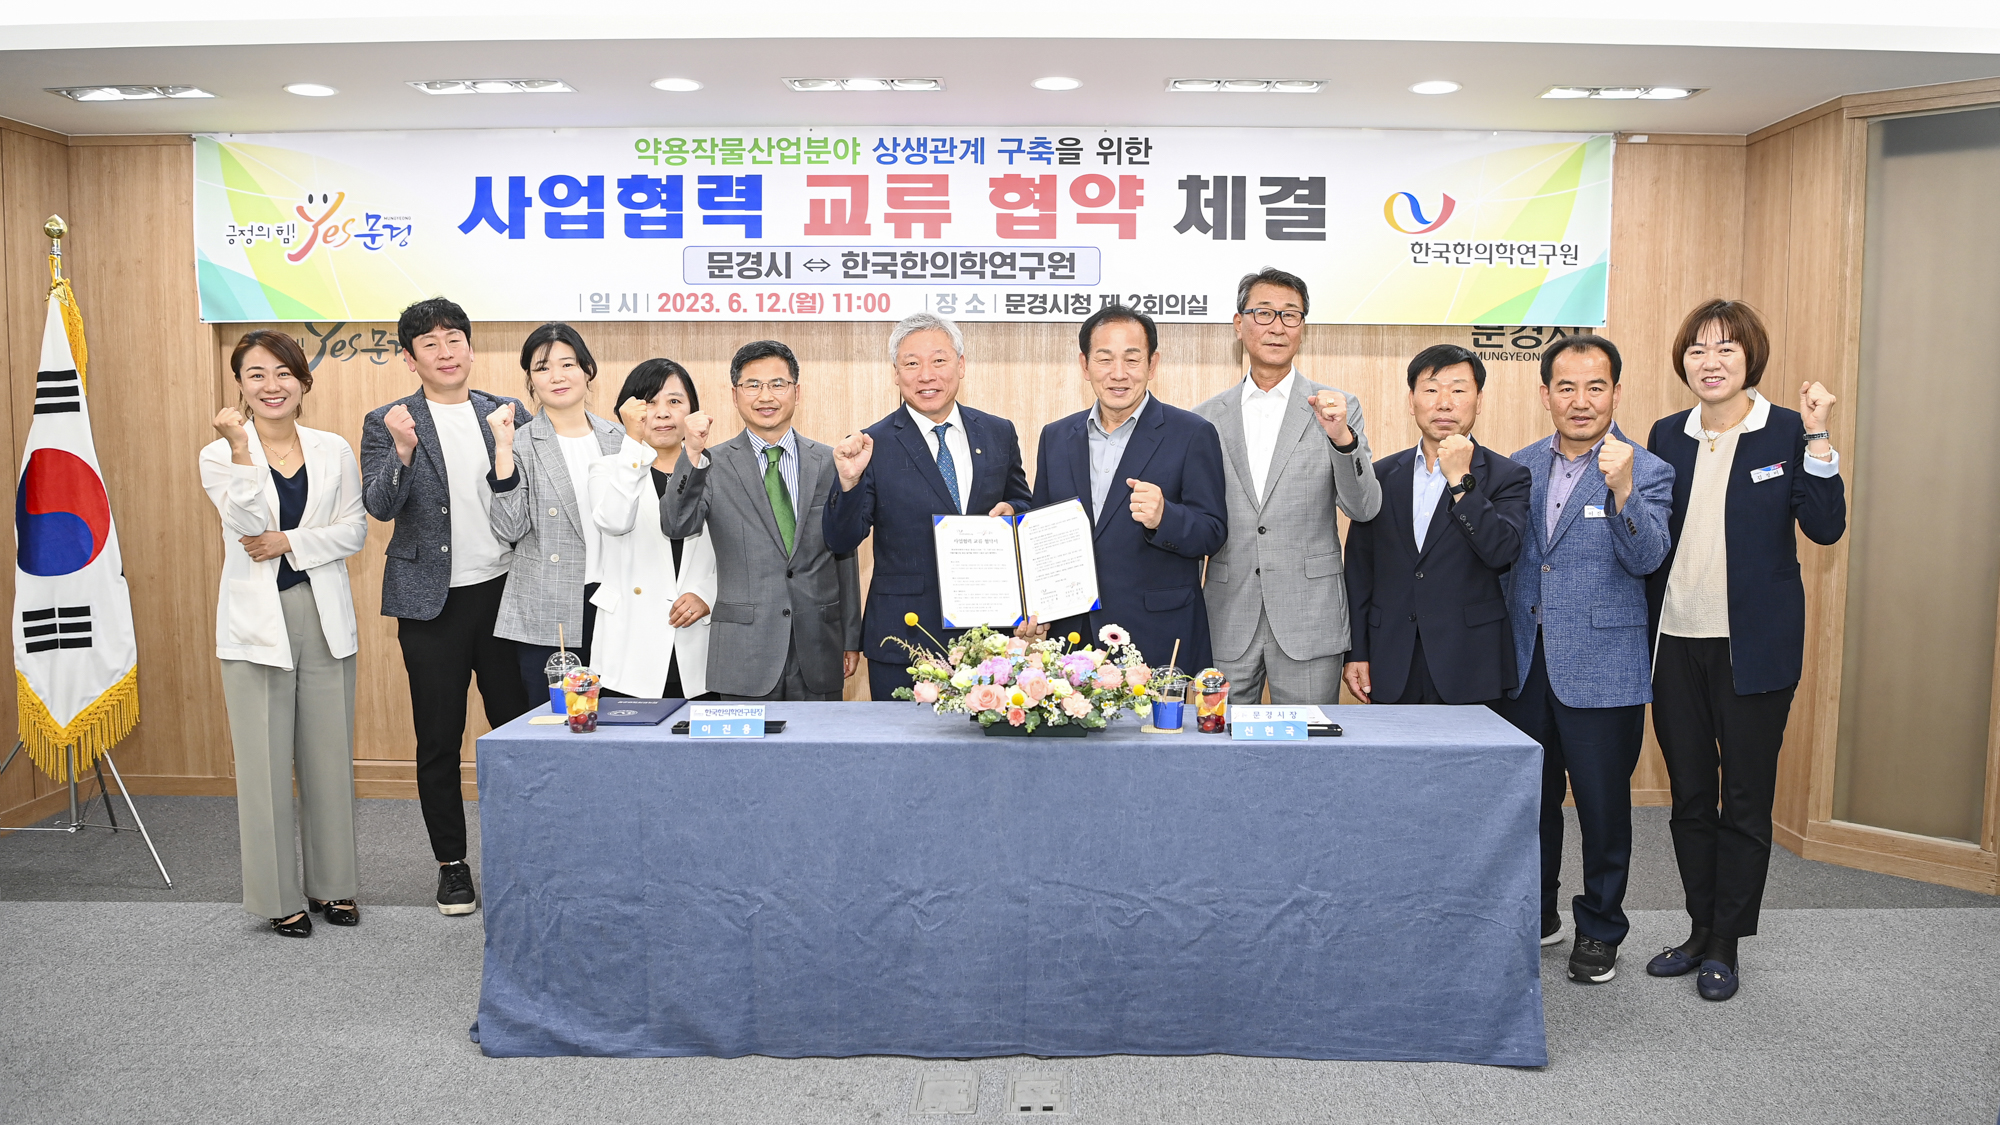 MoU Signing Ceremony Between KIOM and MUNGYEONG-CITY 사진1